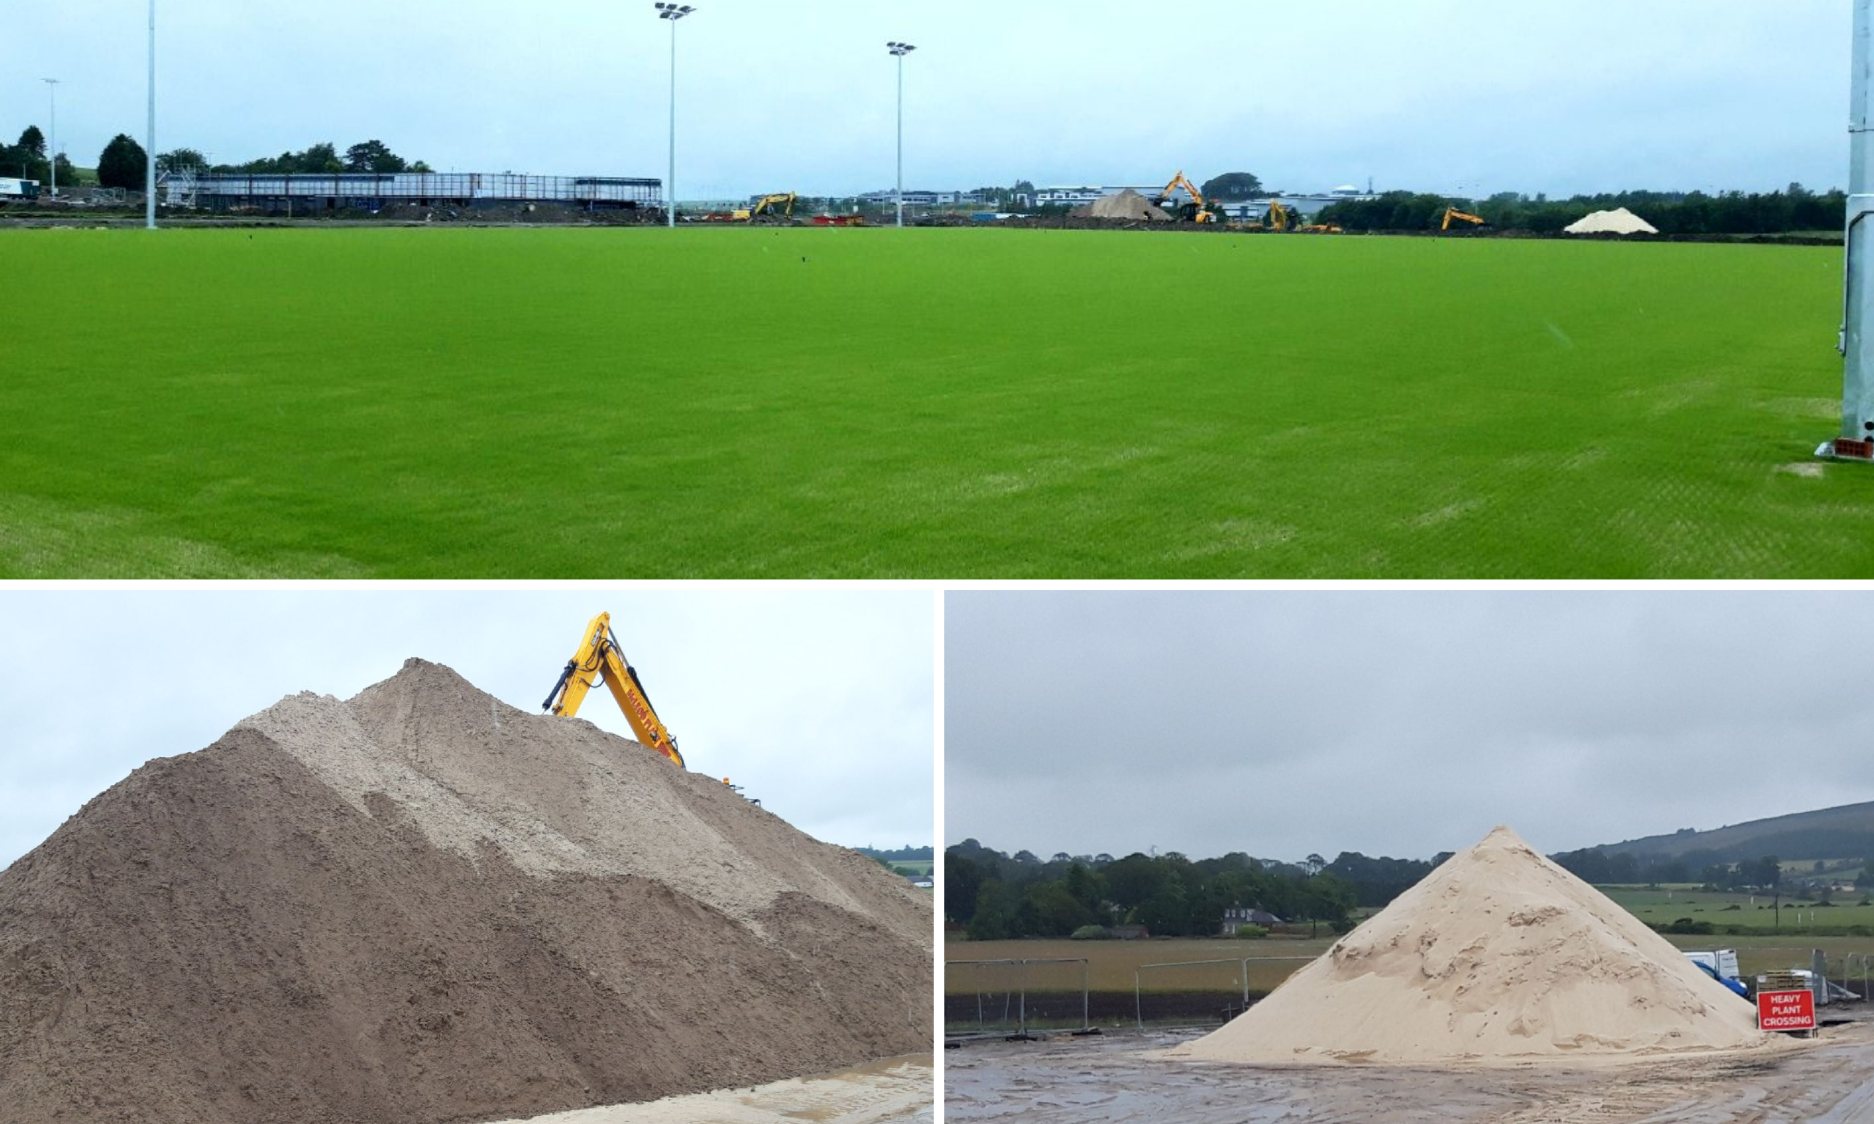 Aggregate Industries provides the base for Aberdeen FC development